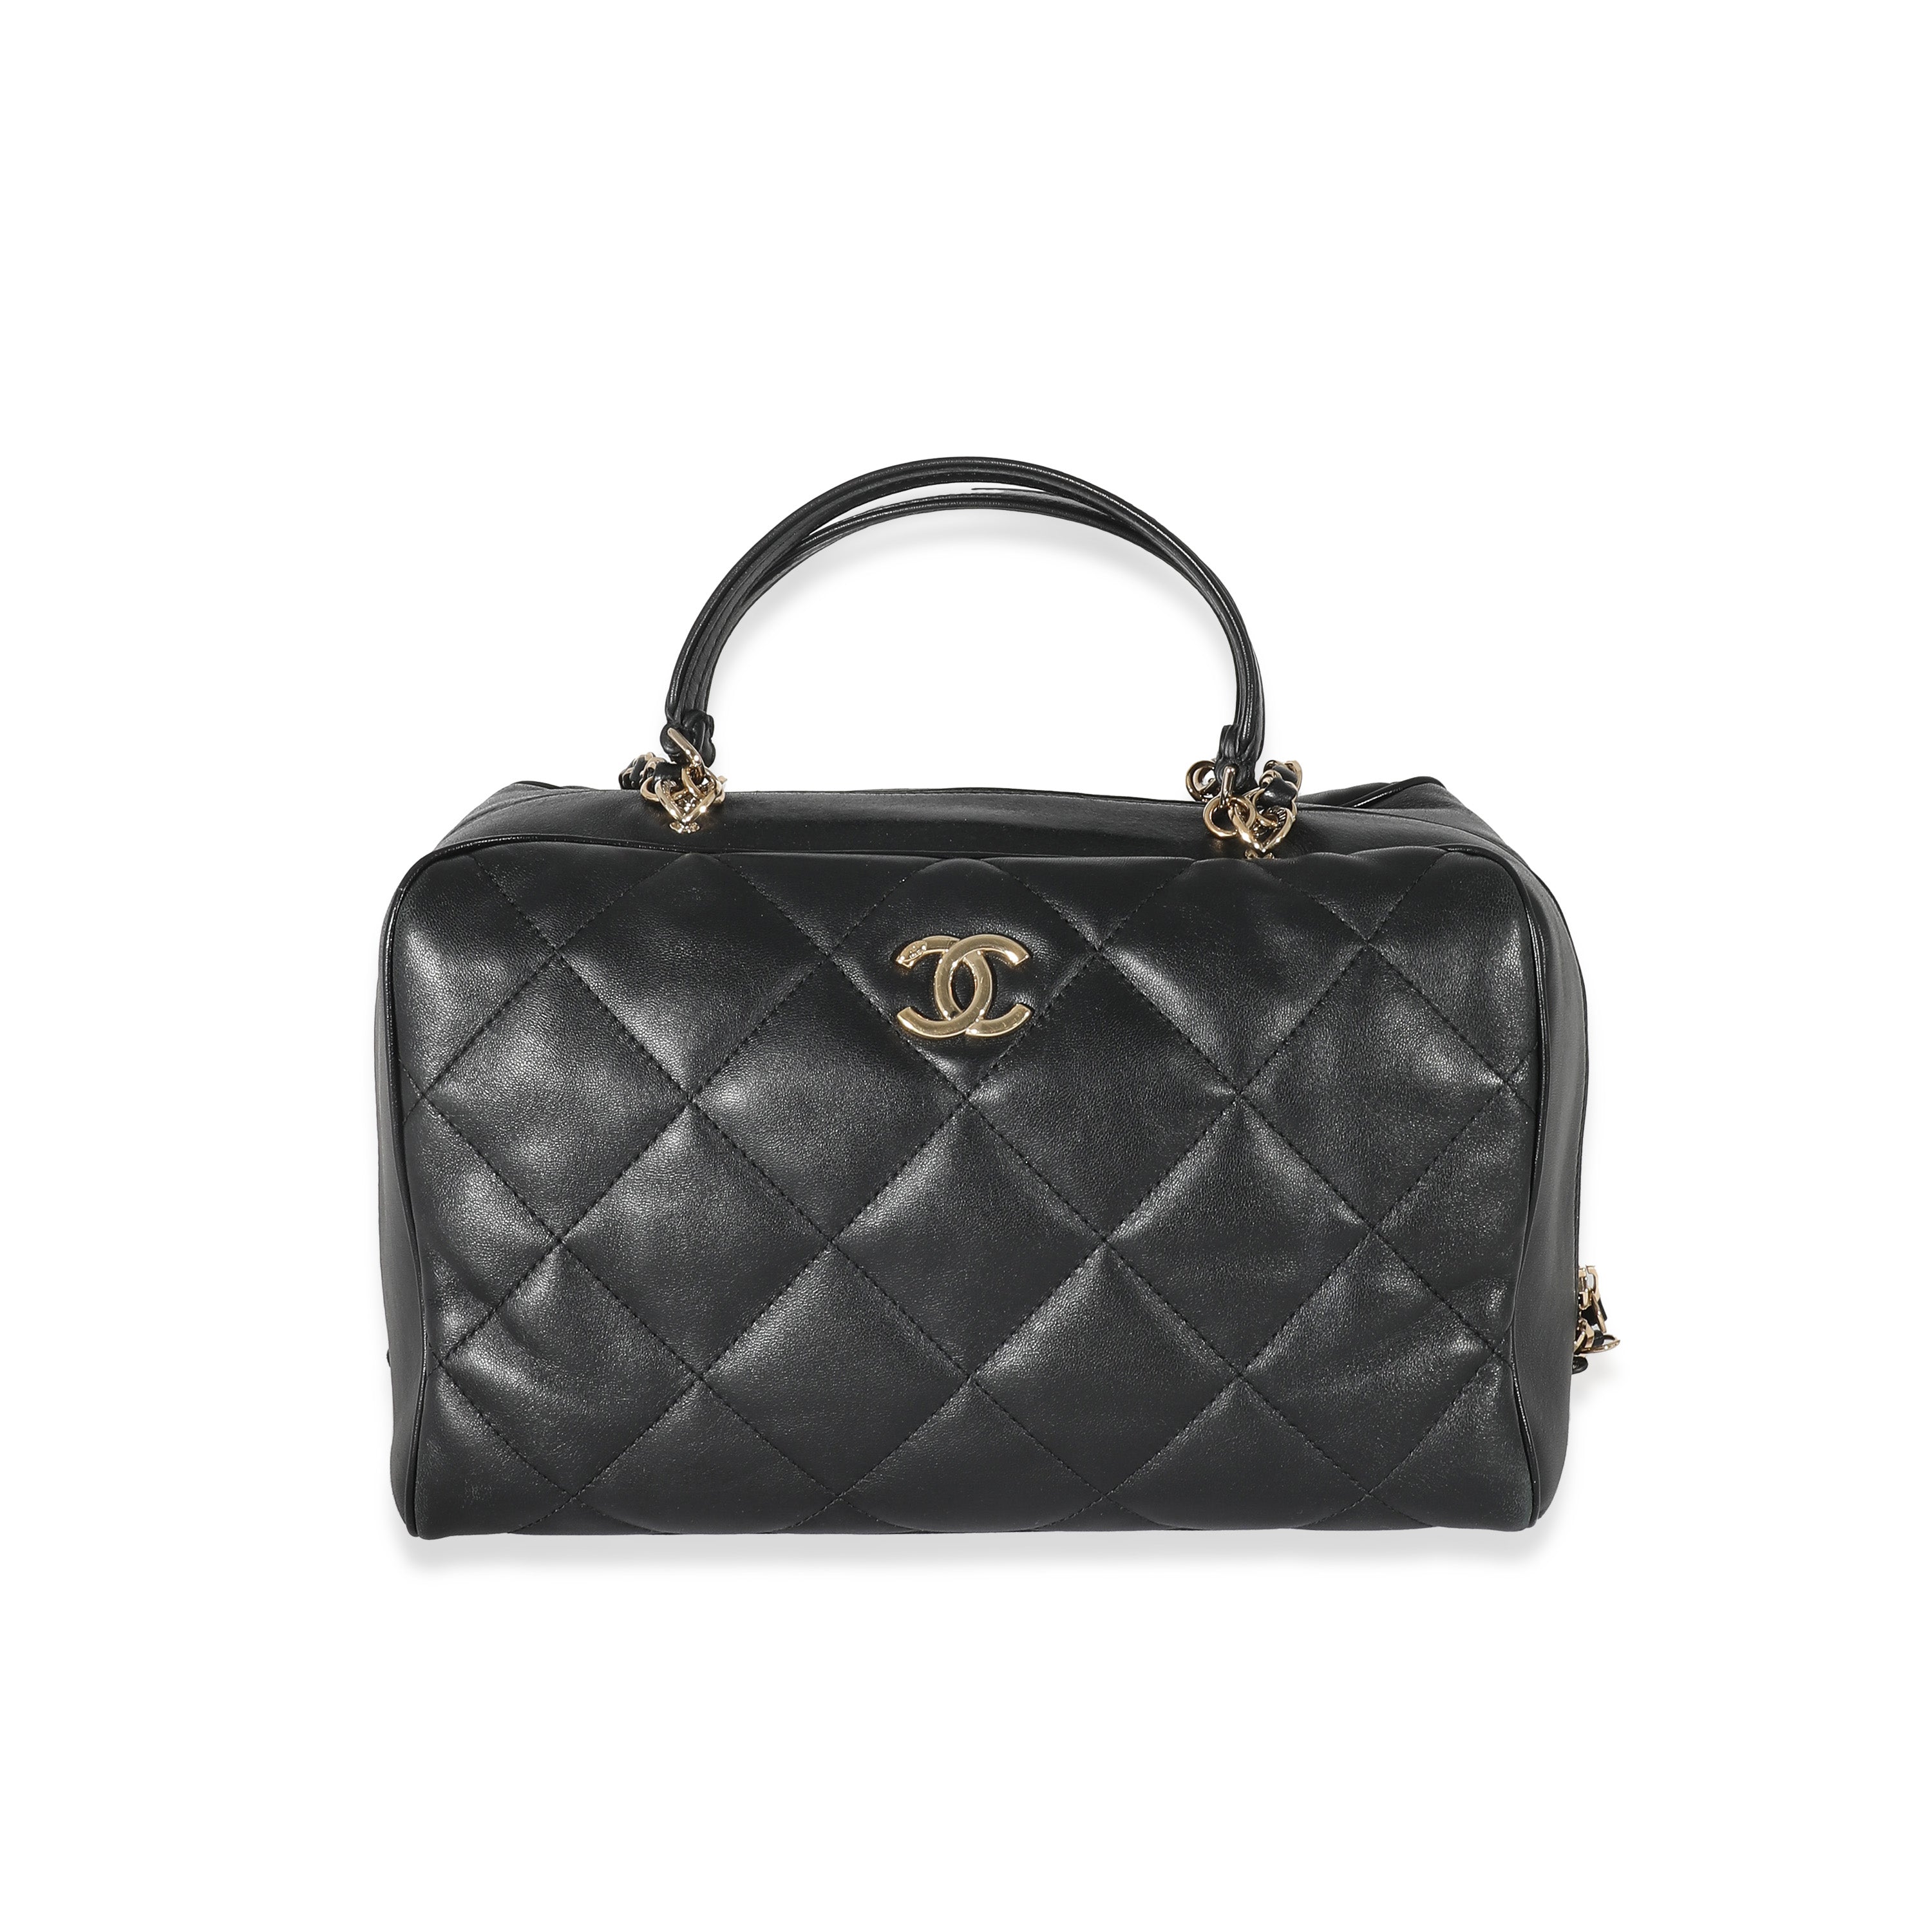 Chanel Beige Quilted Lambskin CC Trendy Bowling Bag